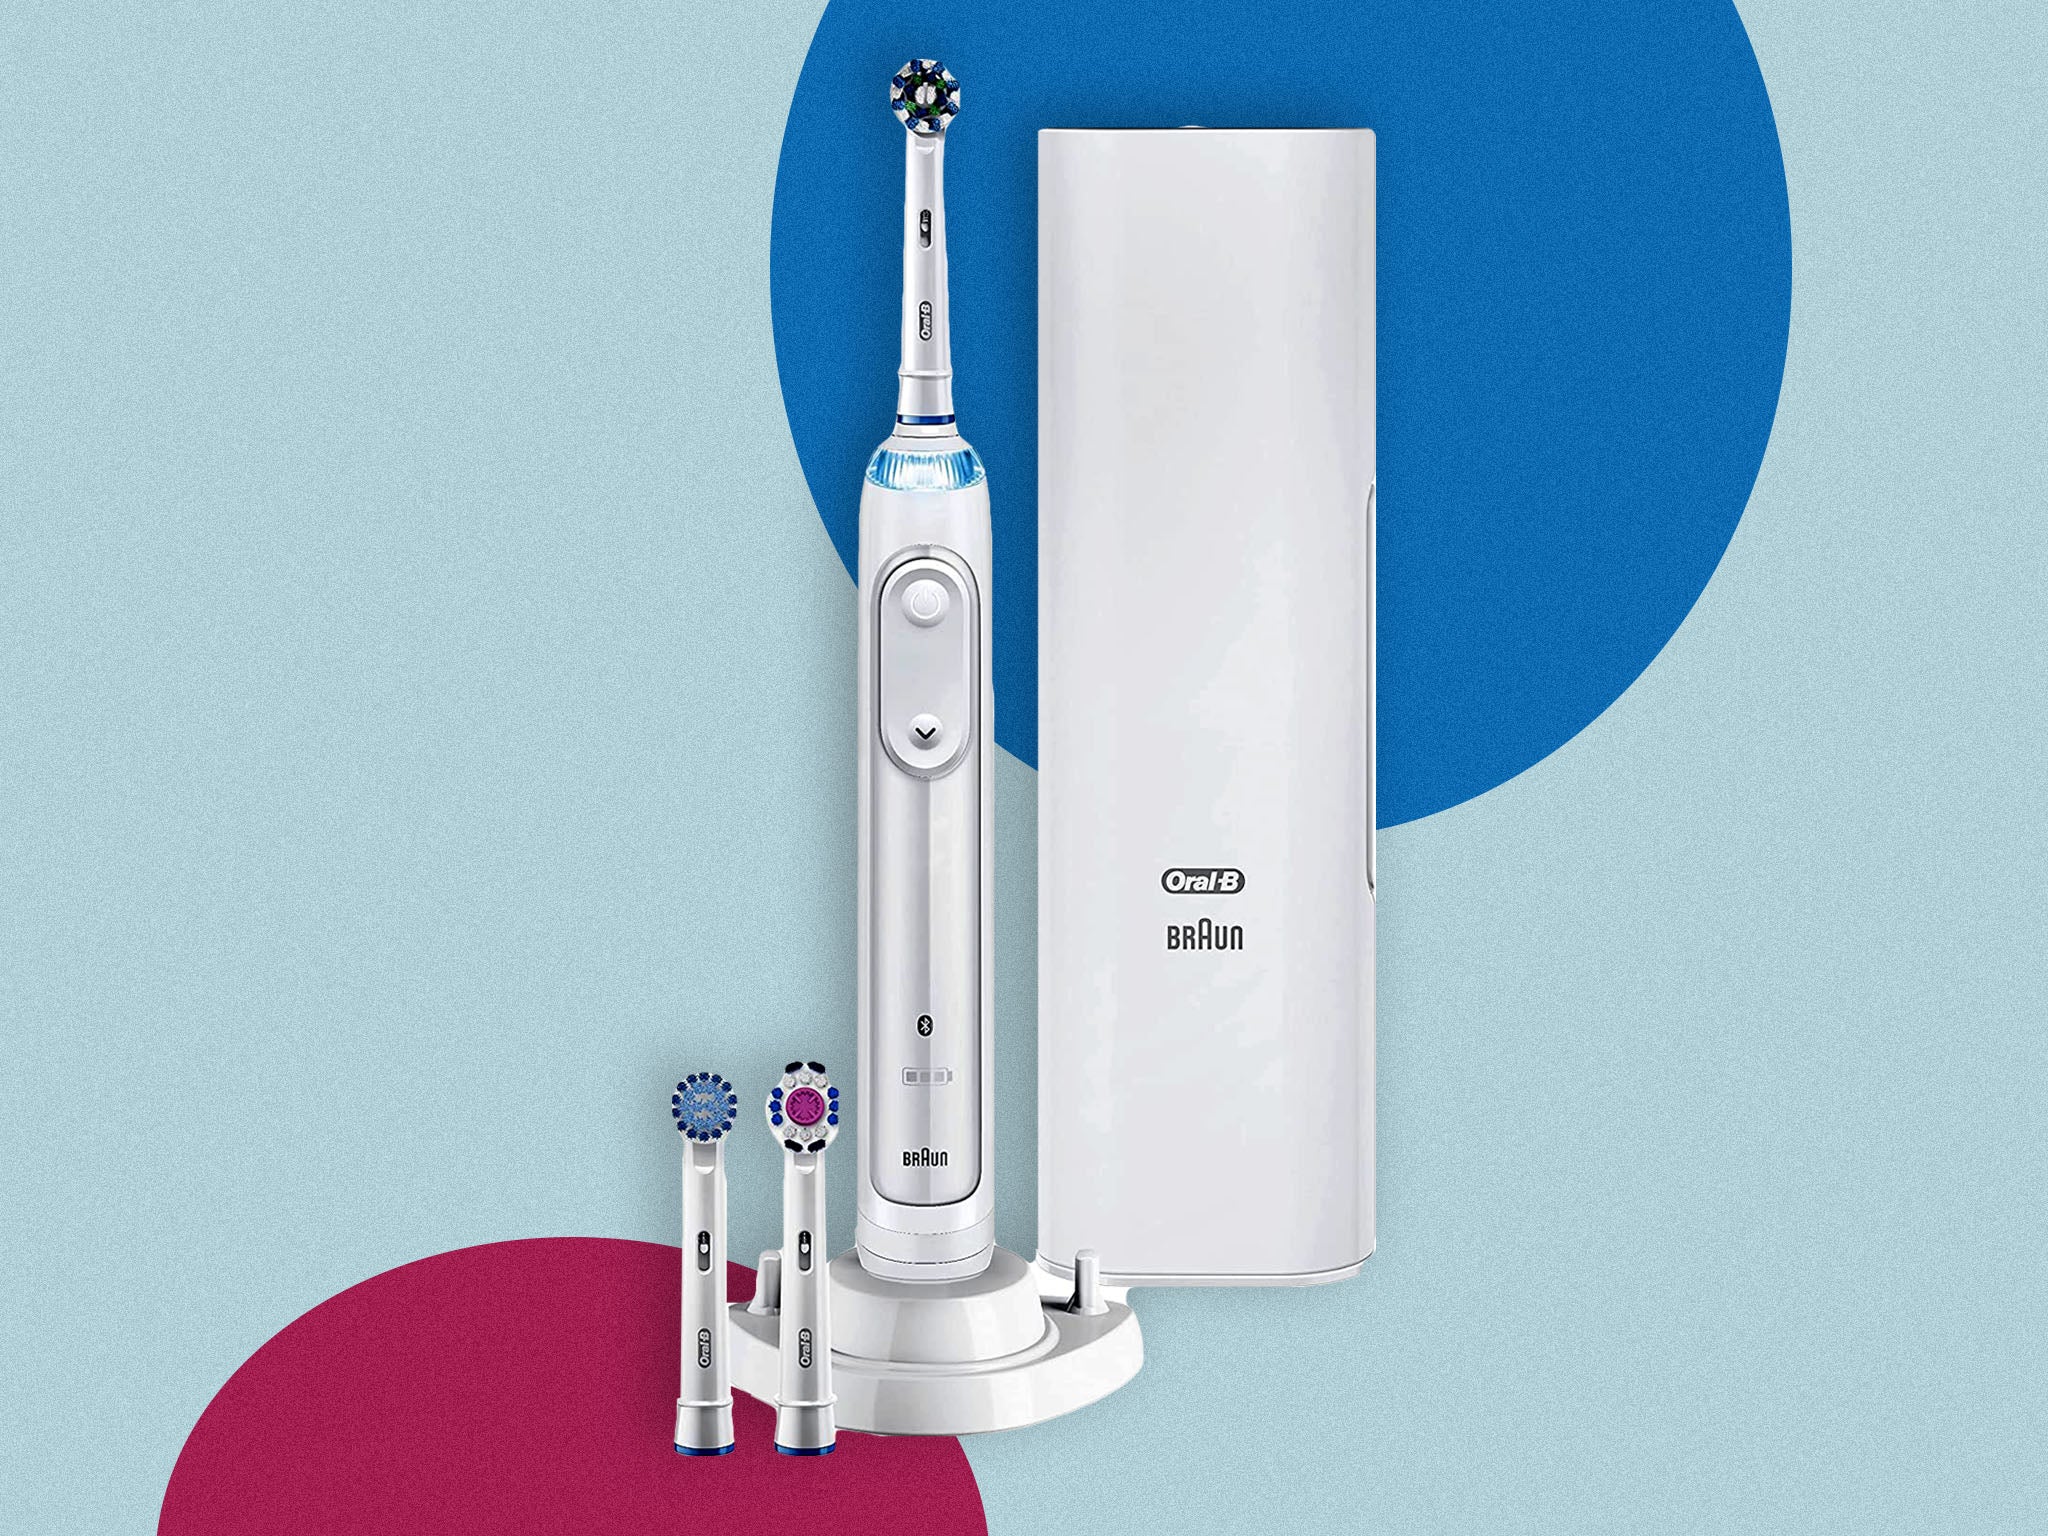 The toothbrush can be synced up to an app for brushing tips and oral health advice too